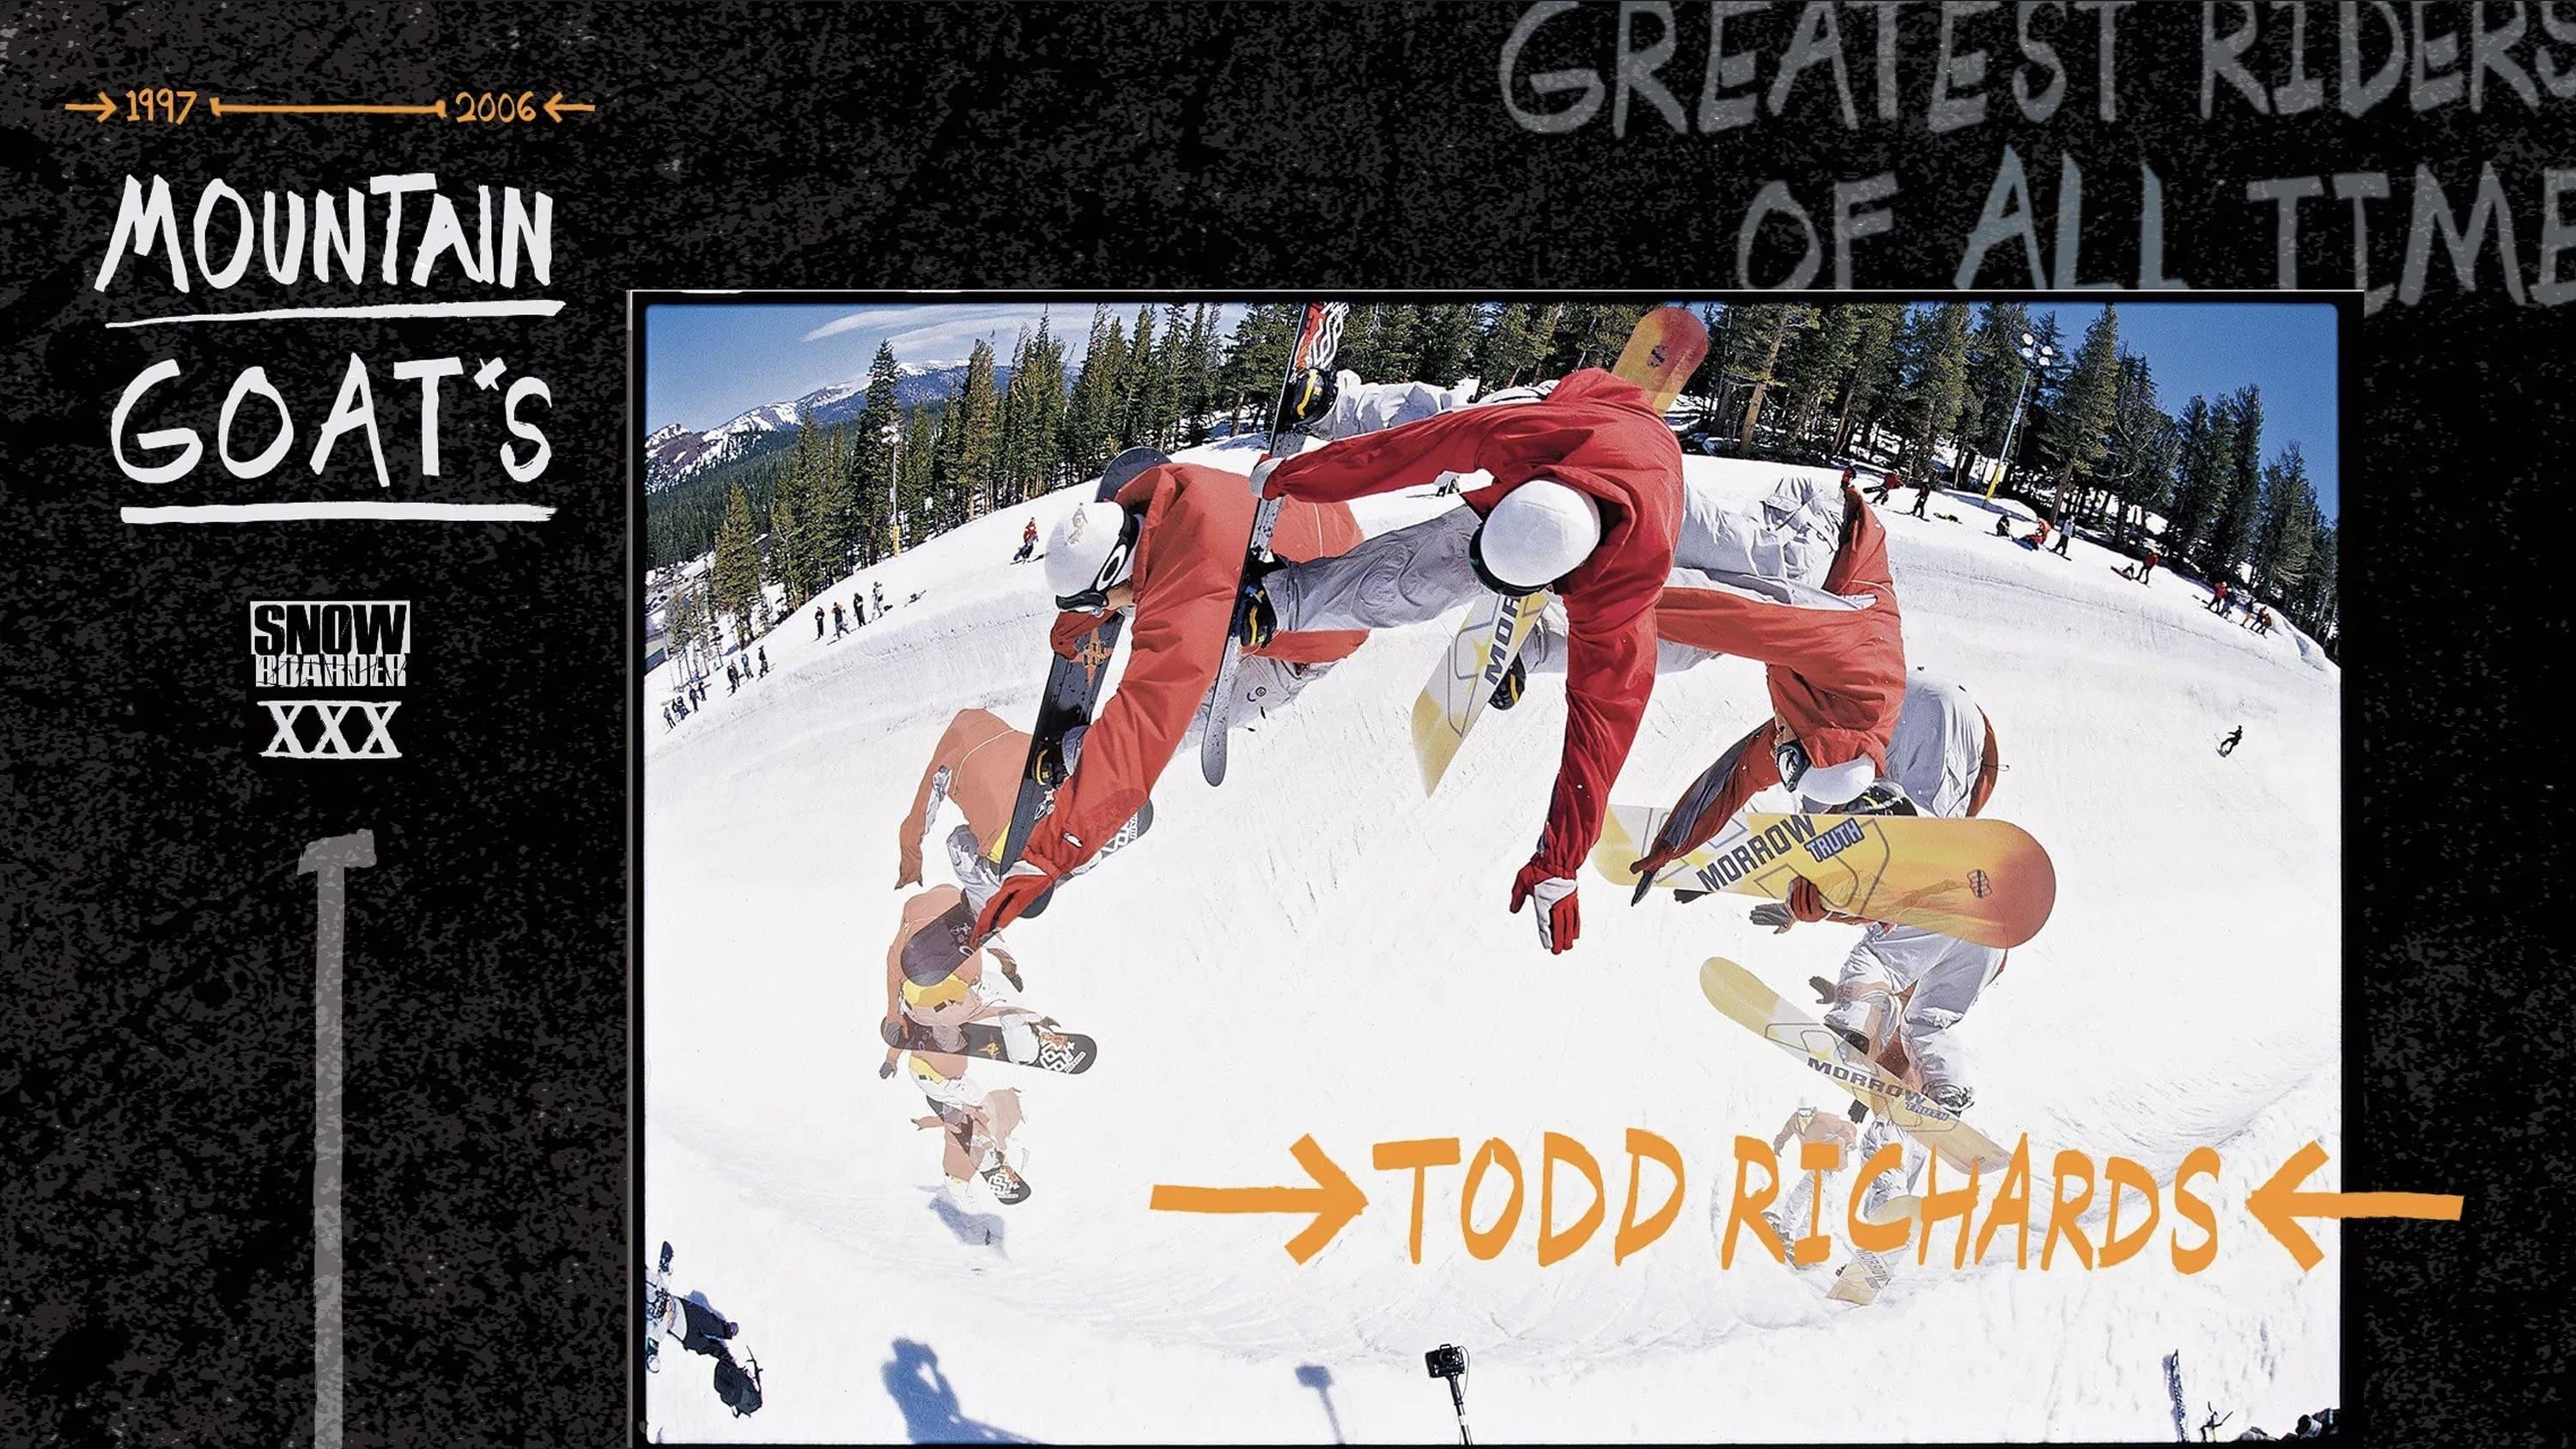 Todd Richards' Trick Tips, Vol. 1: Snowboarding - Park and Pipe Basics backdrop